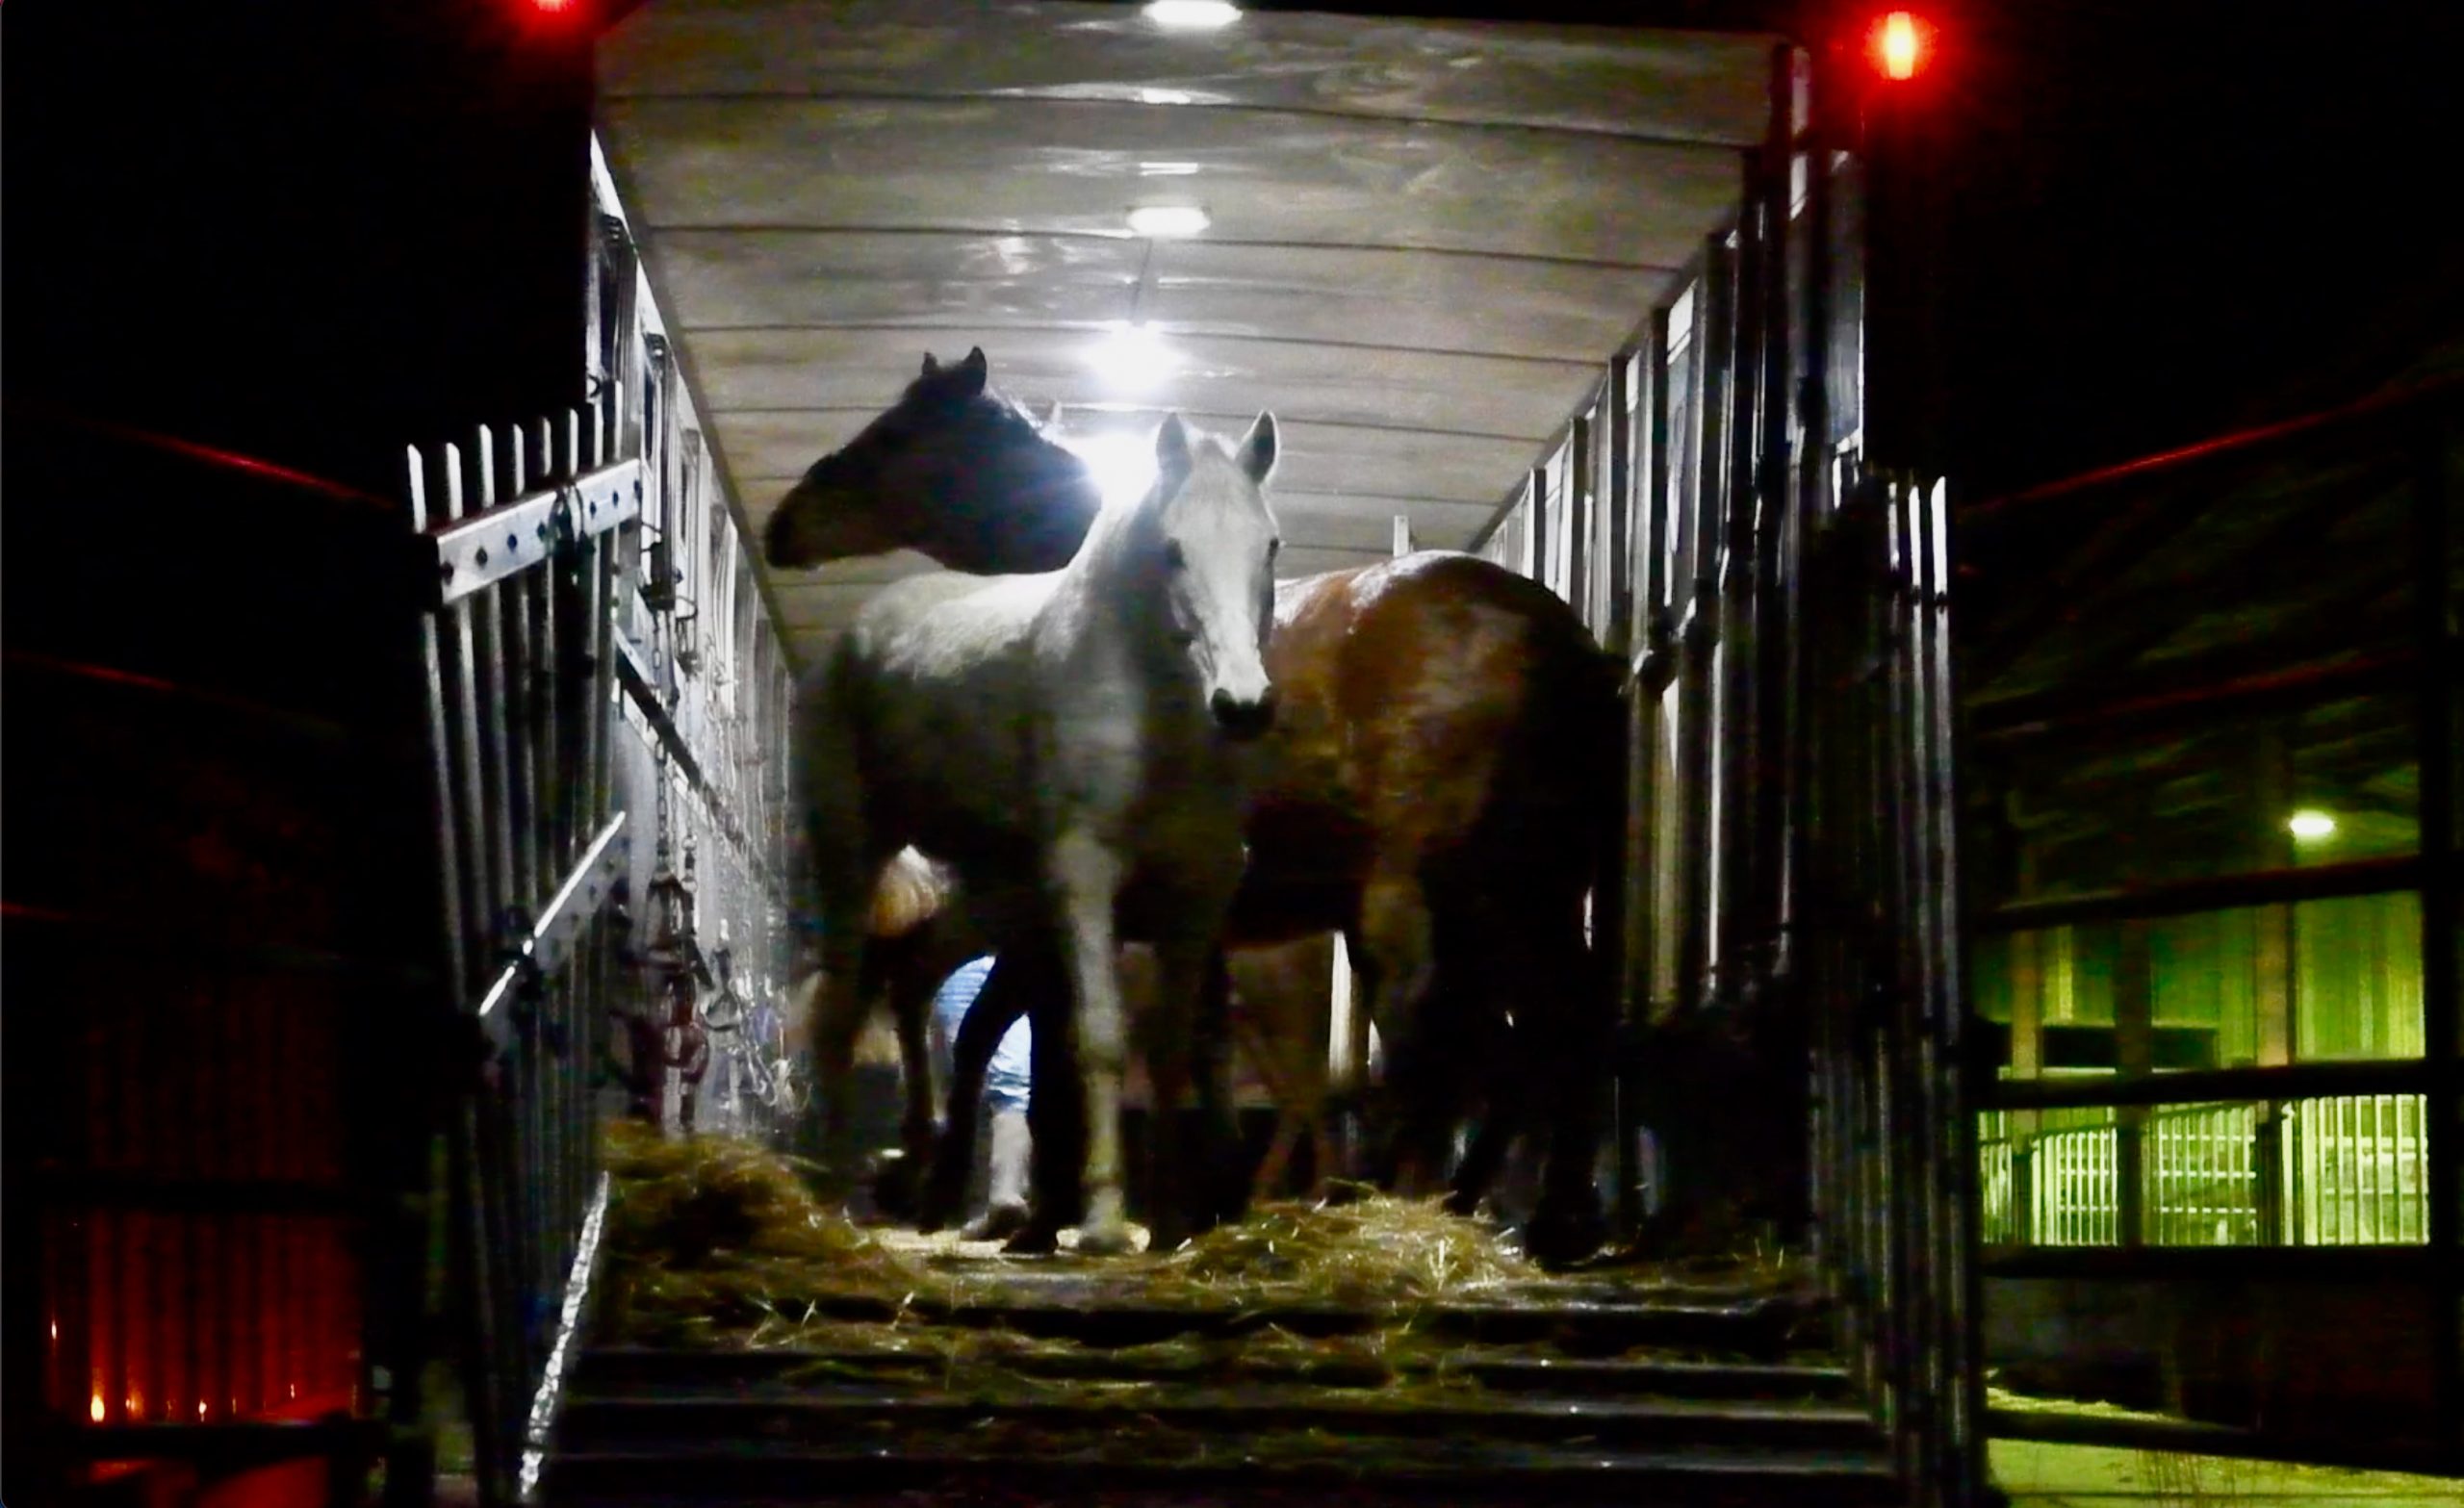 Horses unloading at the slaughterhouse